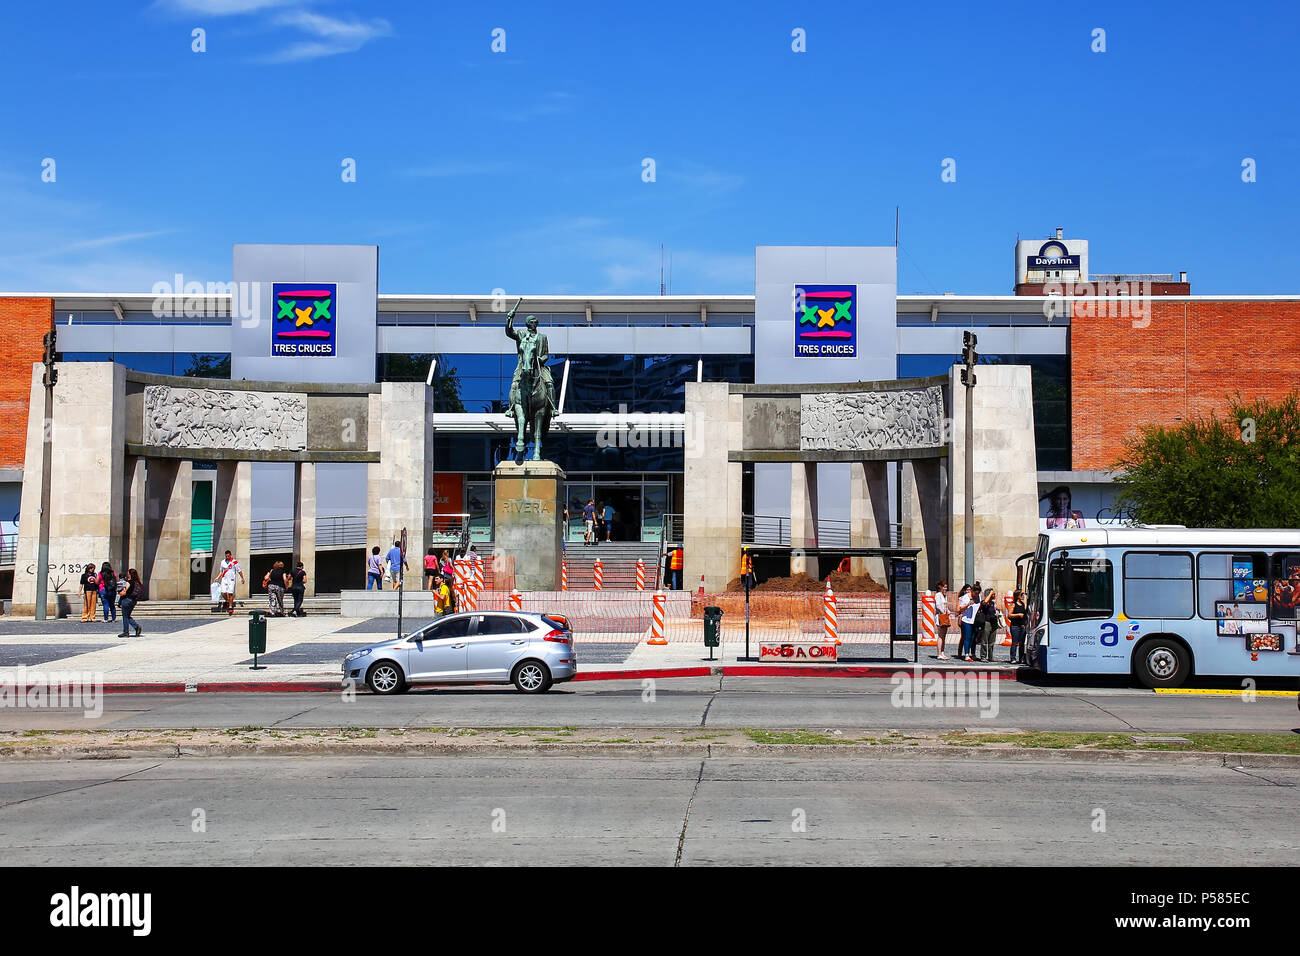 Tres Cruces bus terminal in Montevideo, Uruguay. Montevideo is the capital and largest city of Uruguay. Stock Photo